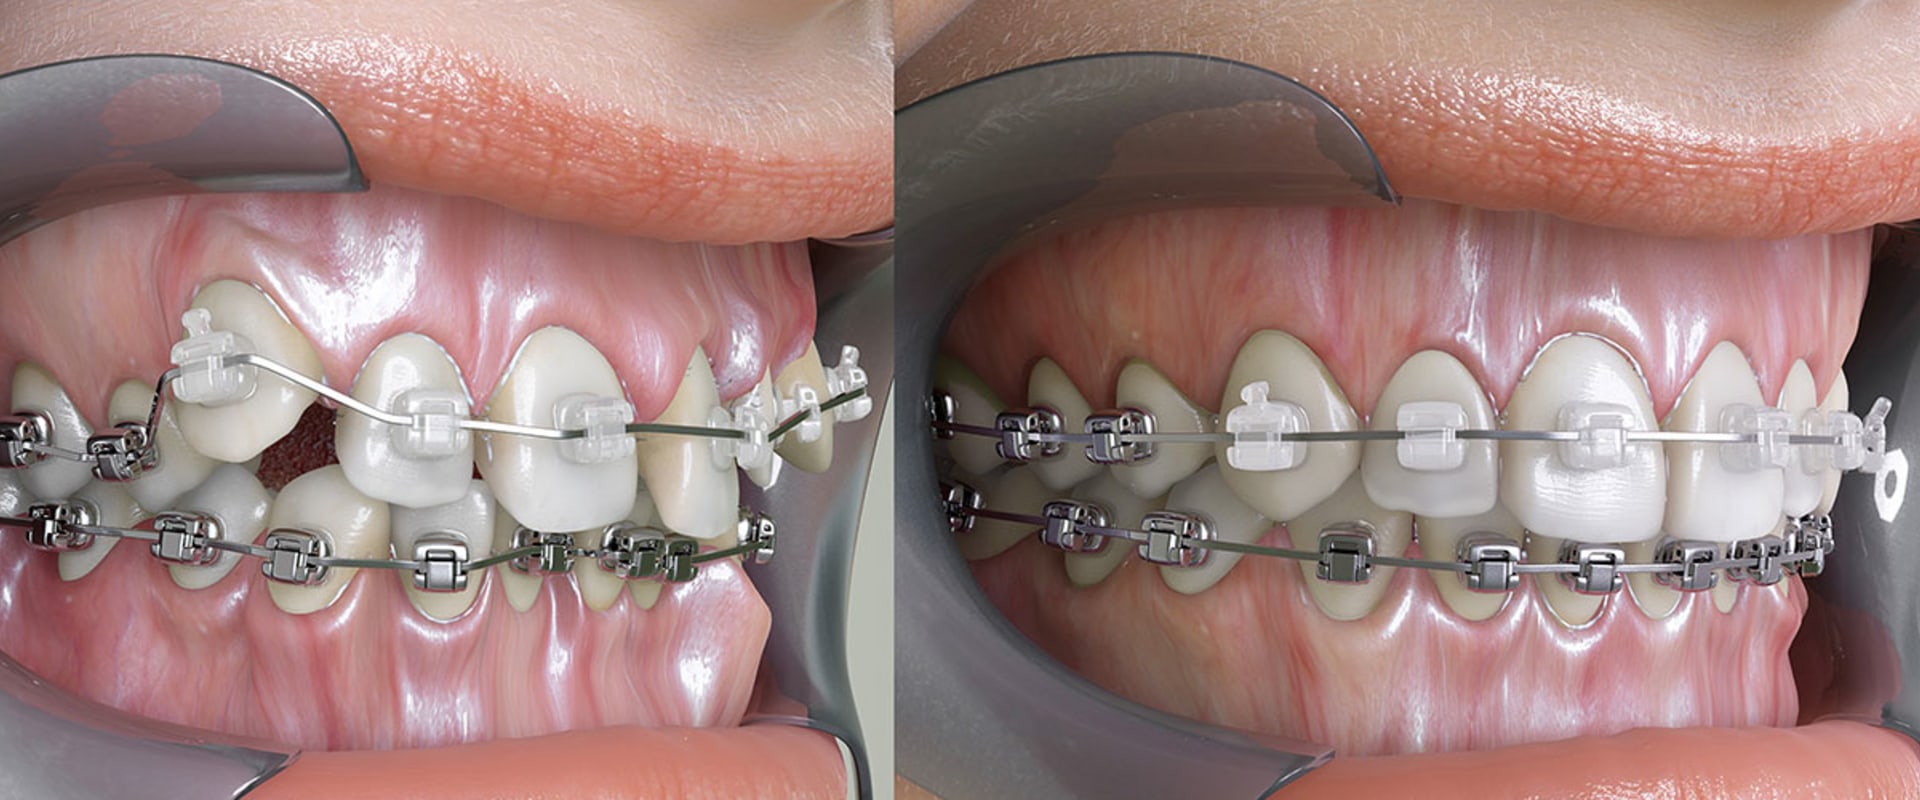 Preventing Jaw Problems During Orthodontic Treatment: Expert Advice